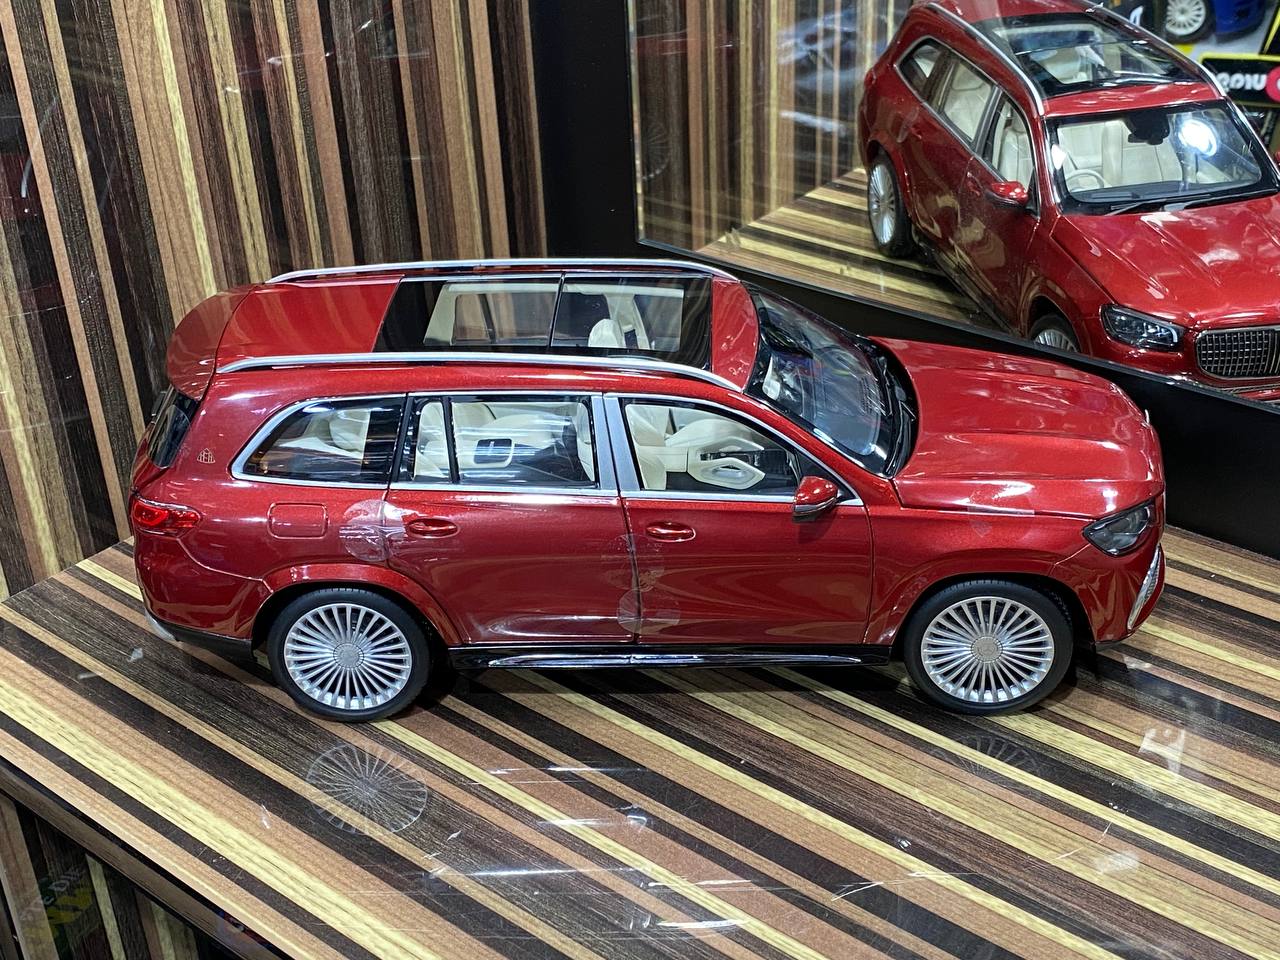 1/18 Diecast Mercedes-Maybach GLS 600 4MATIC Norev Scale Model Car